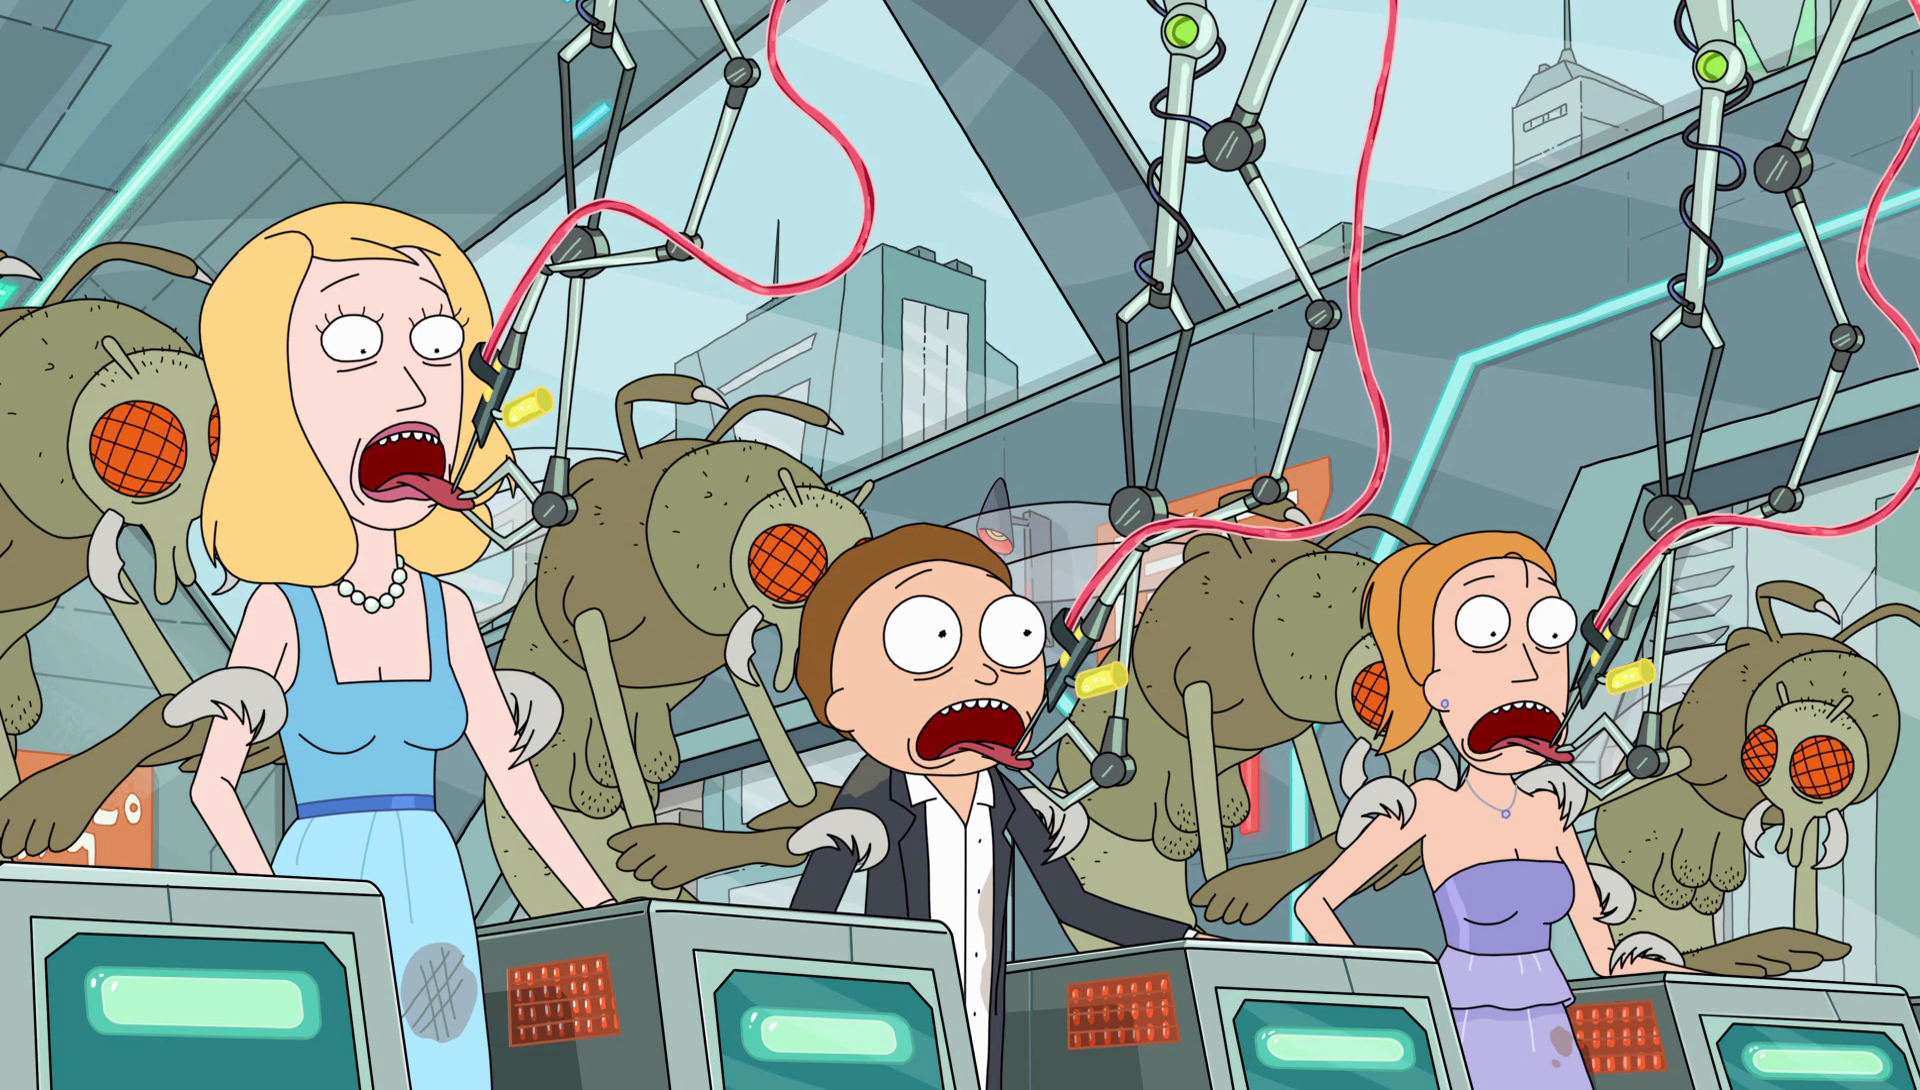 Image S2e10 Beth Summer Morty Dna Png Rick And Morty Wiki Fandom